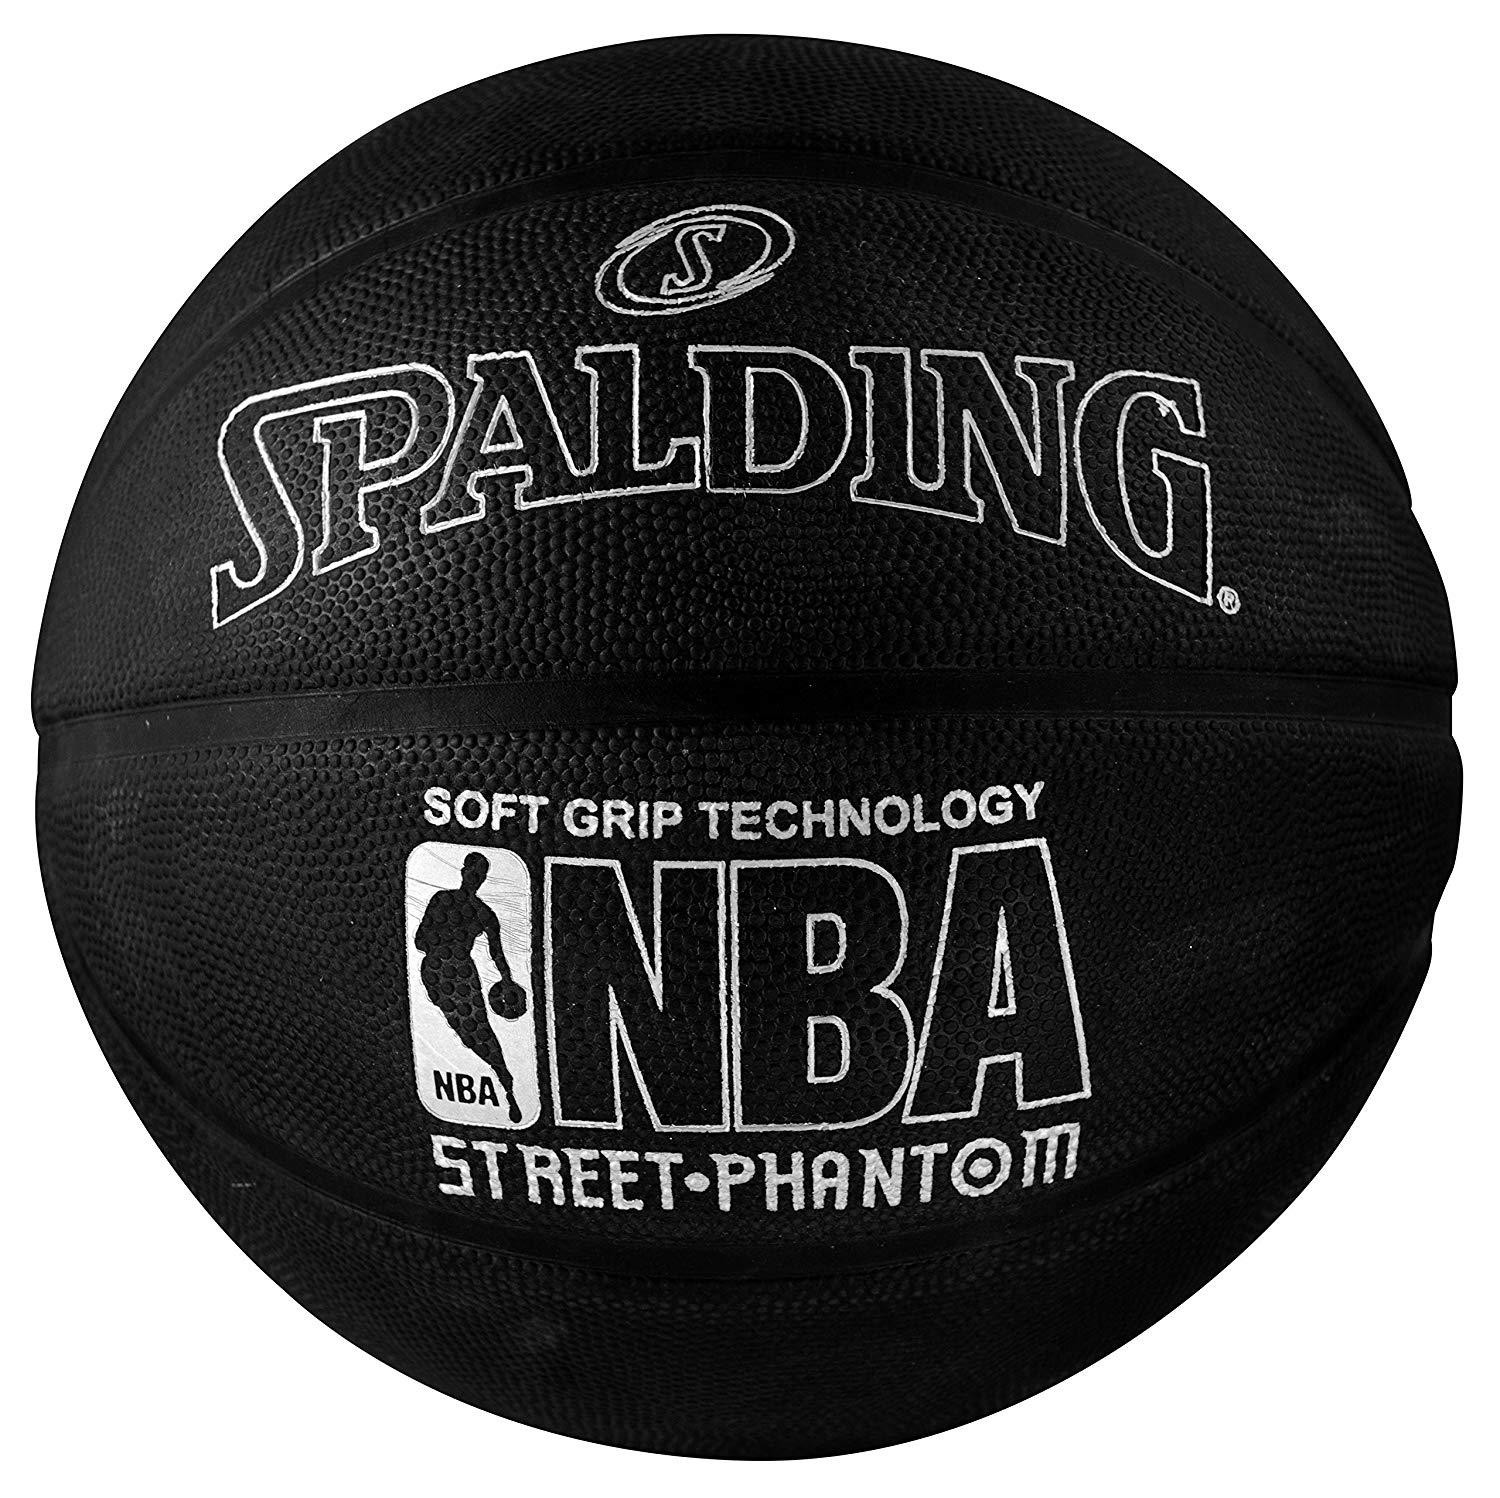 The 10 Best Outdoor Basketballs to Buy in 2023 - Sportsglory